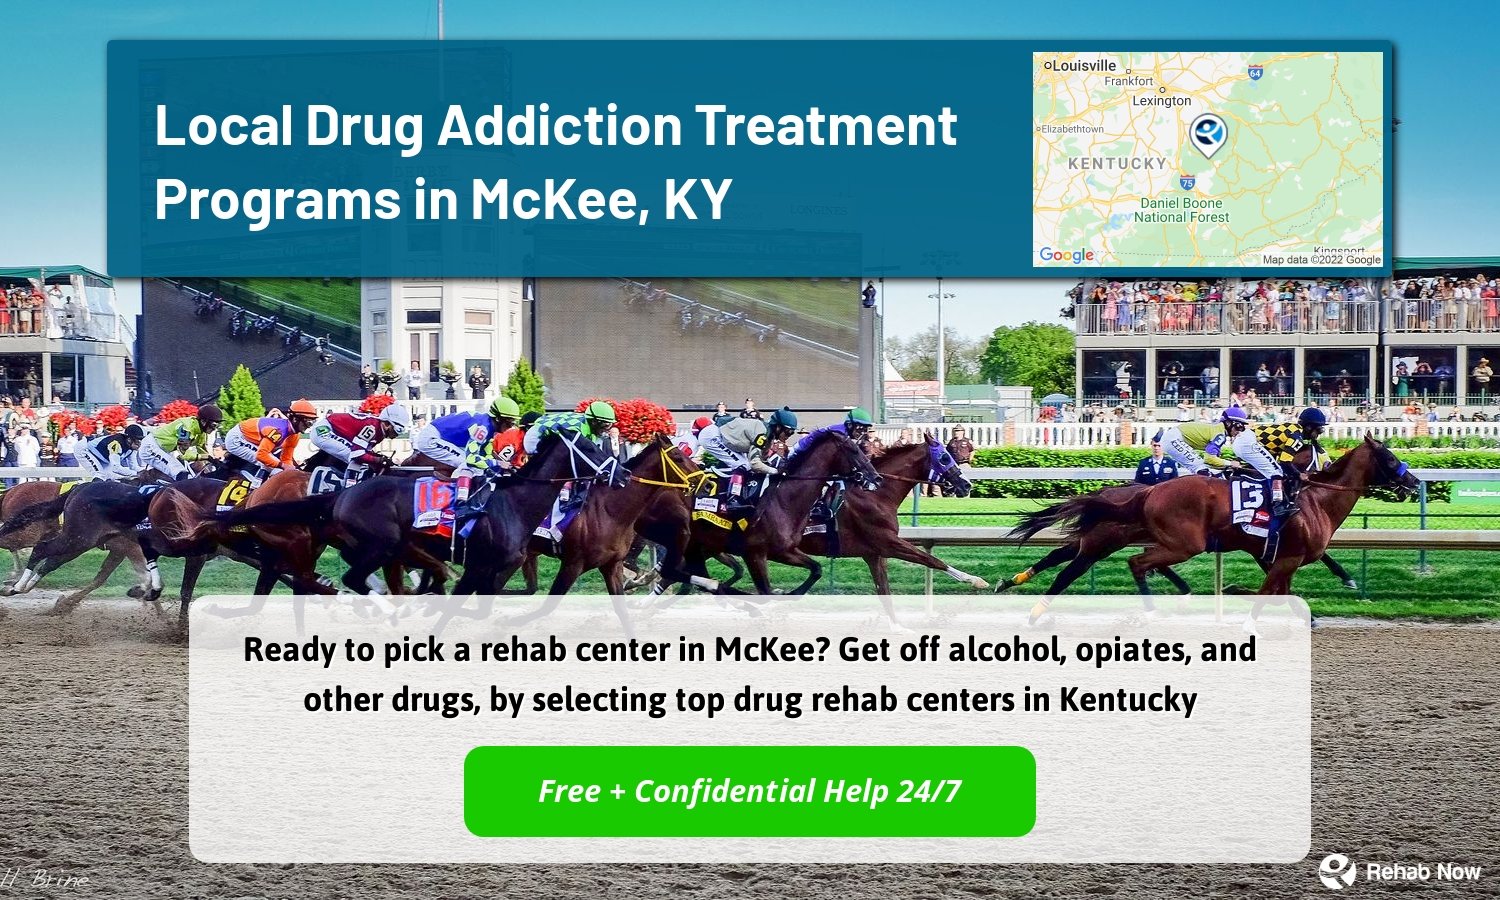 Ready to pick a rehab center in McKee? Get off alcohol, opiates, and other drugs, by selecting top drug rehab centers in Kentucky